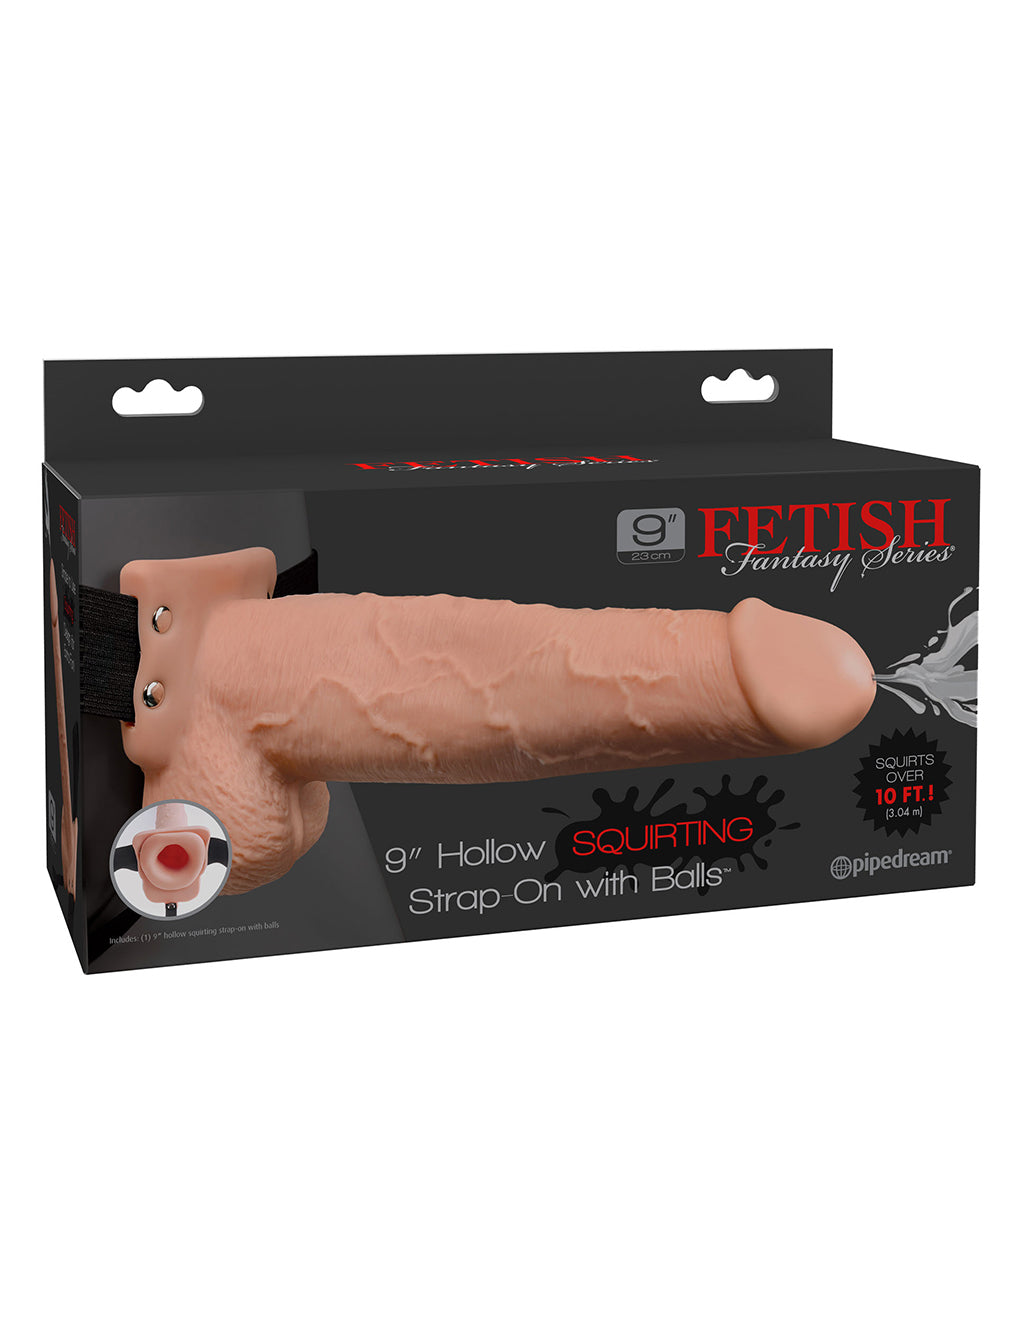 Fetish Fantasy 9" Squirting Strap-On- Package